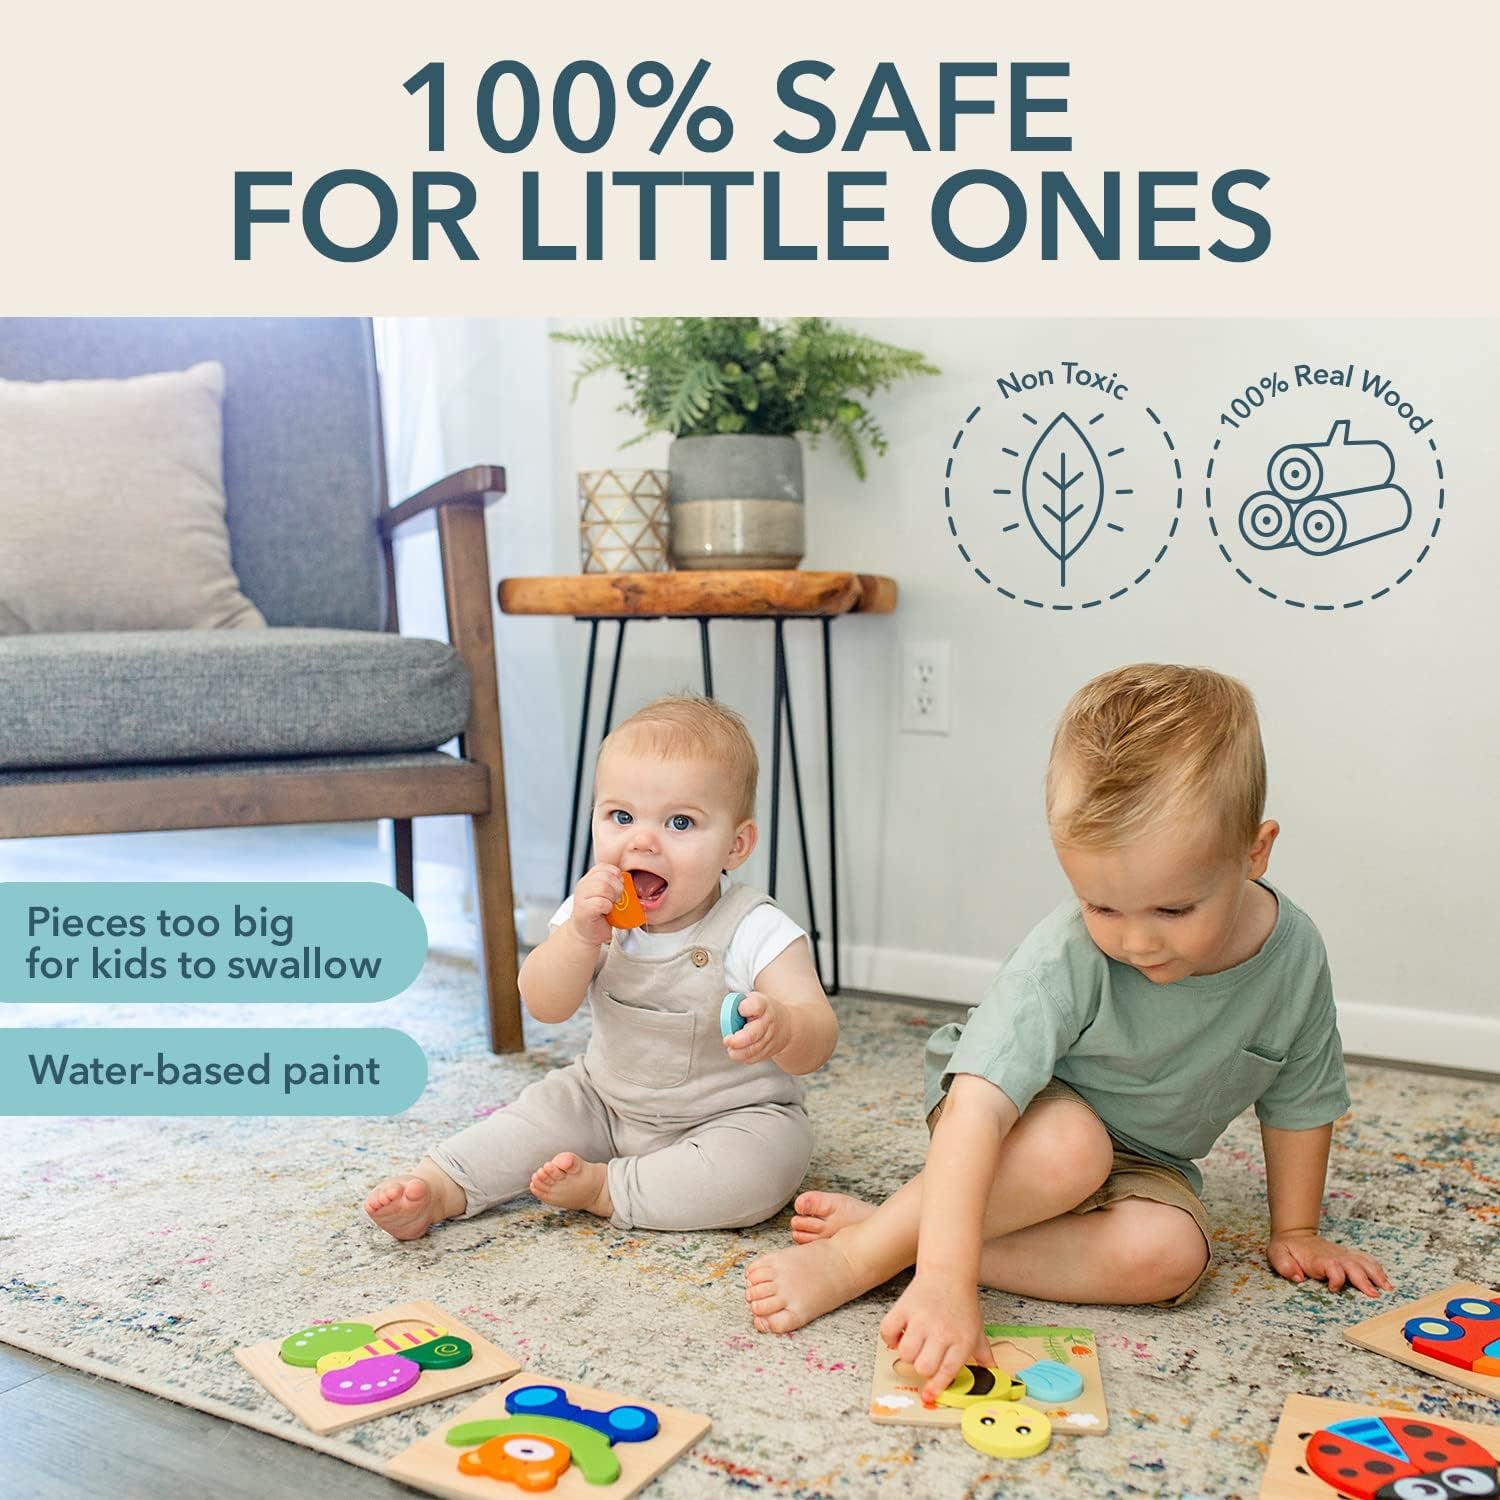 Wood Puzzles for Toddlers 1-3, Set of 6 Montessori Toys for 1 Year Old, Toddler Puzzles, Baby Puzzles with Large Pieces Safe for Kids, Includes Storage Bag and Giftable Box